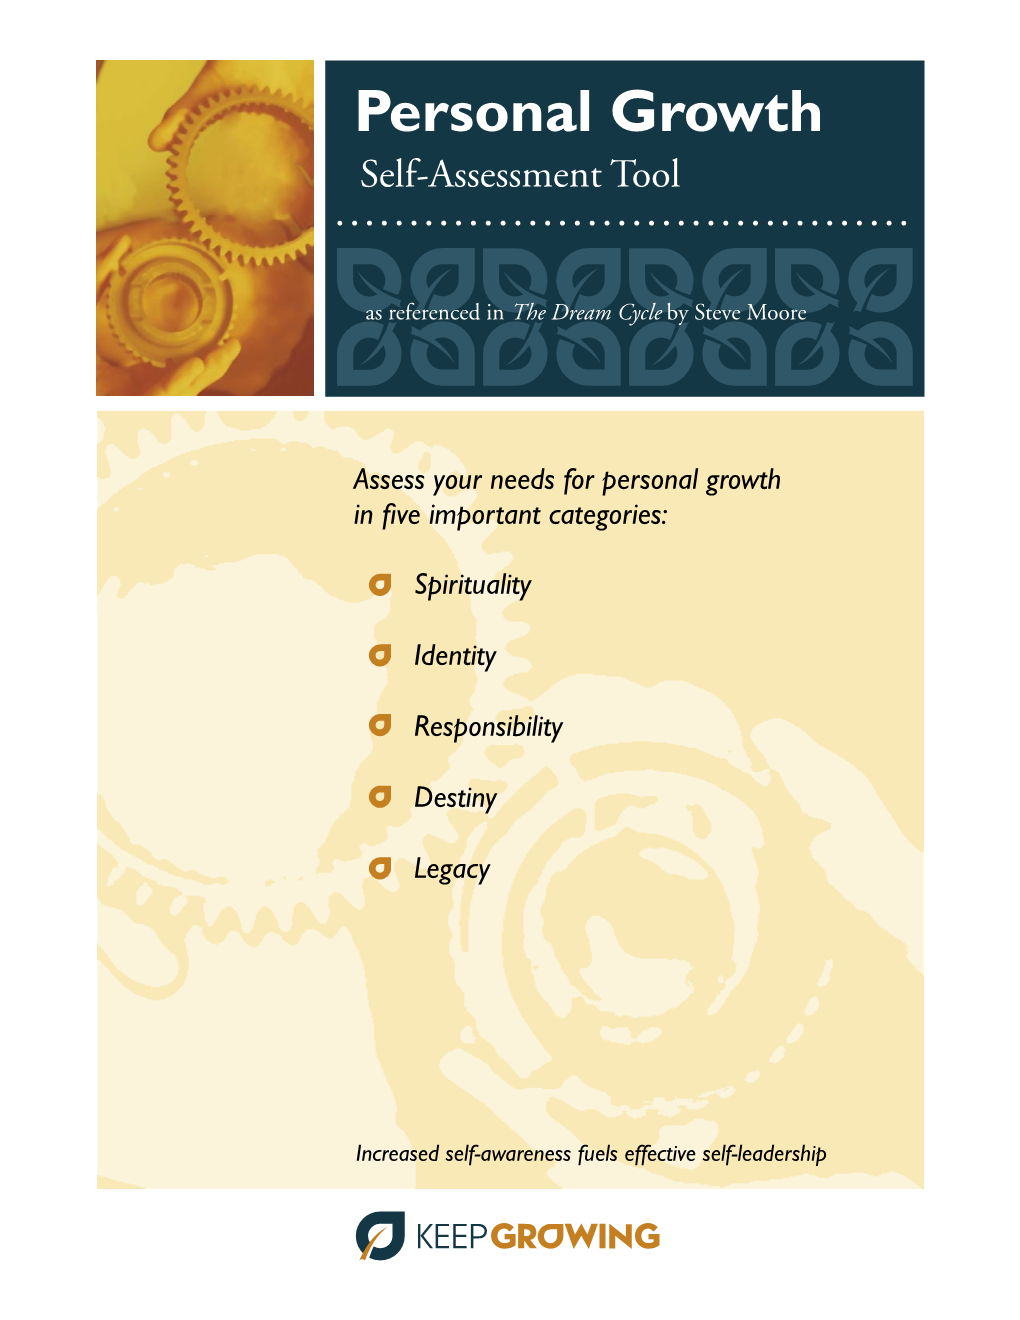 Personal Growth Self-Assessment Tool